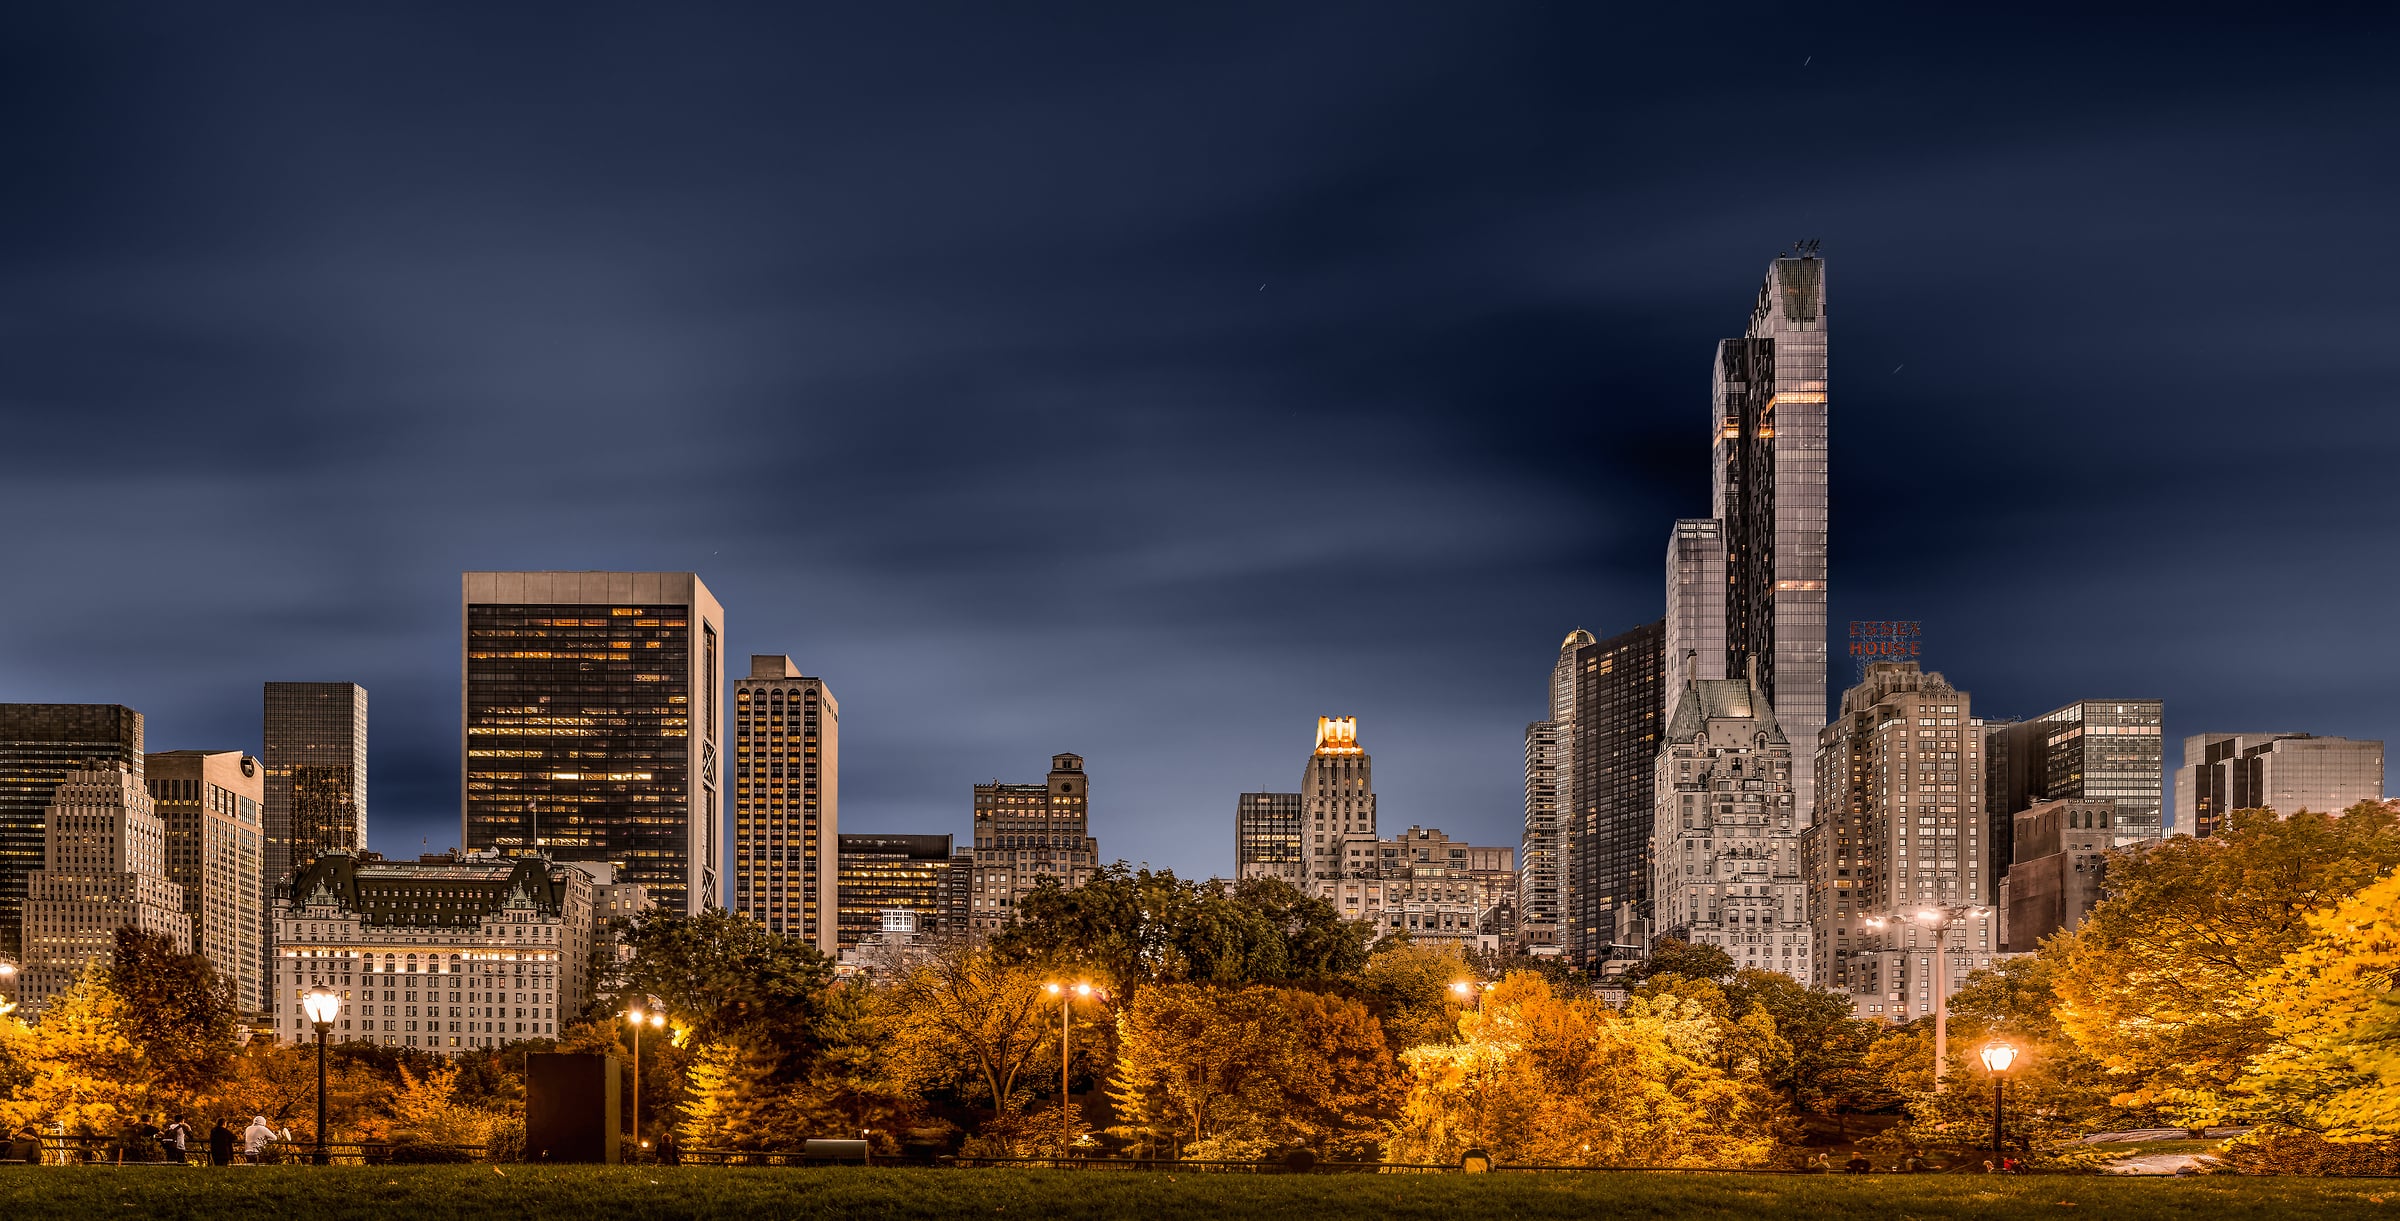 160 megapixels! A very high resolution cityscape VAST photo of the Billionaires' Row skyline in Midtown Manhattan from Central Park in autumn at night; created in New York City by Dan Piech